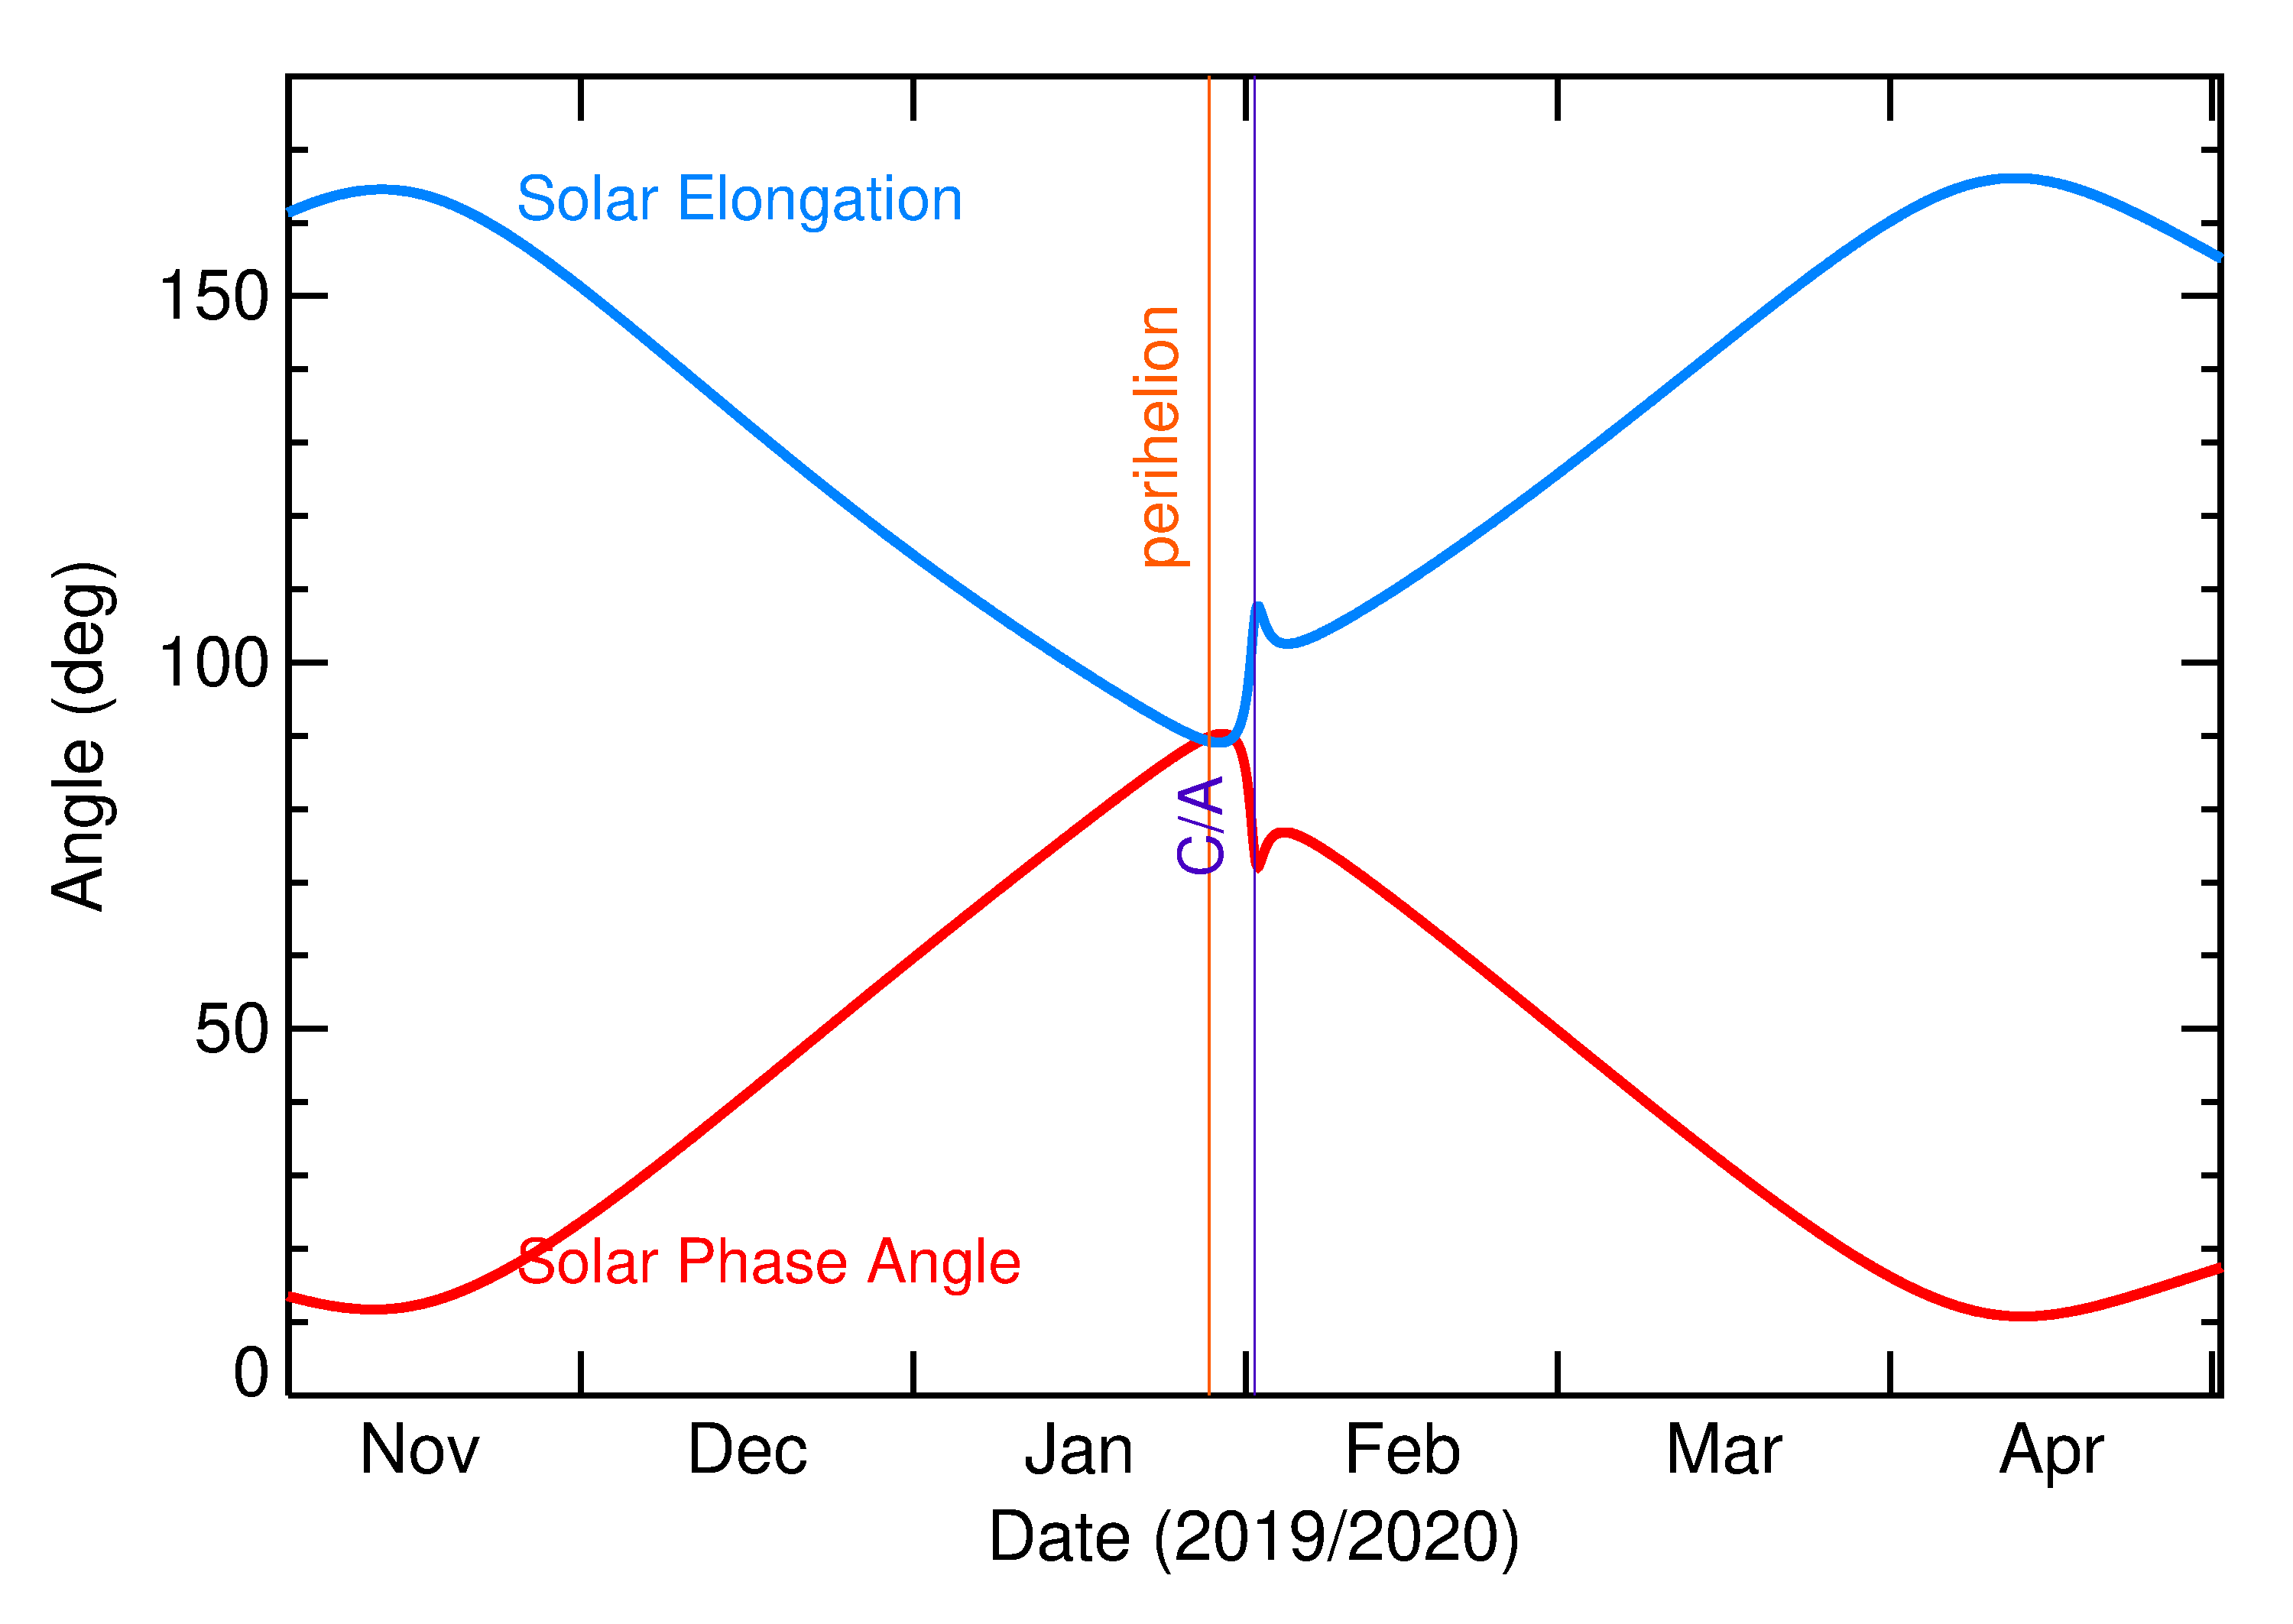 Solar Elongation and Solar Phase Angle of 2020 CJ in the months around closest approach